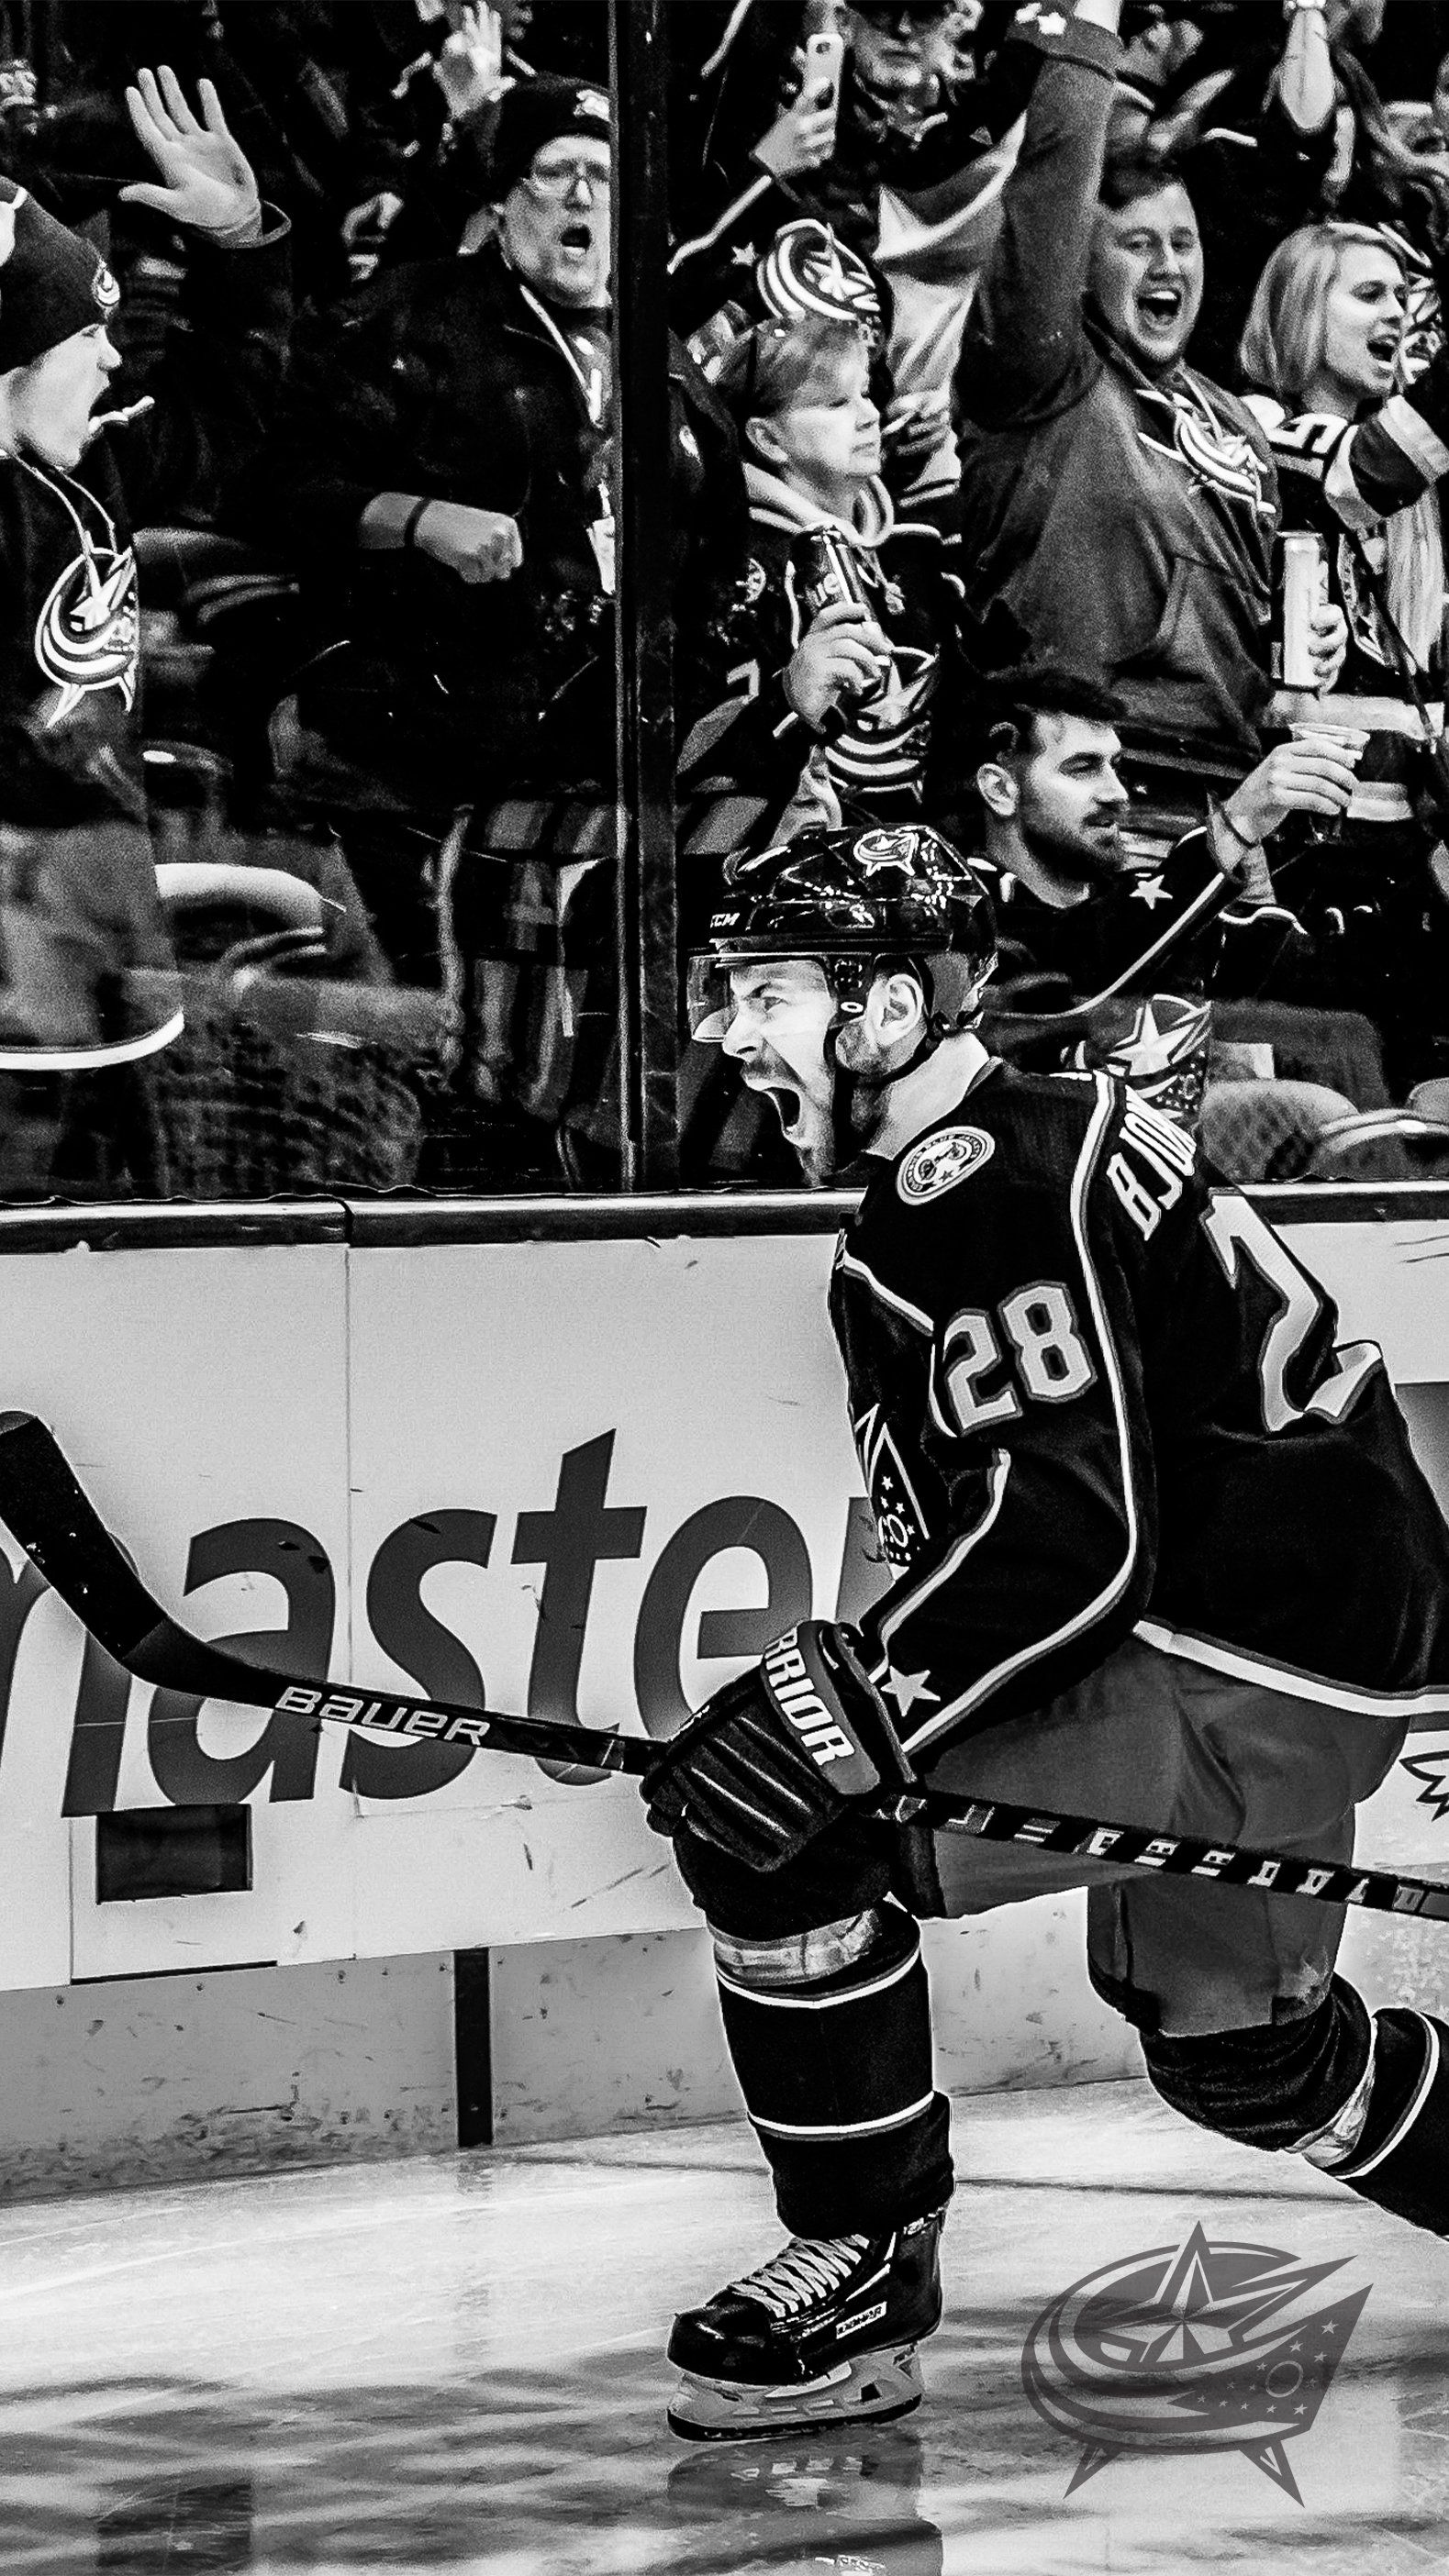 Black and white photo of a hockey player celebrating in front of fans - Black and white